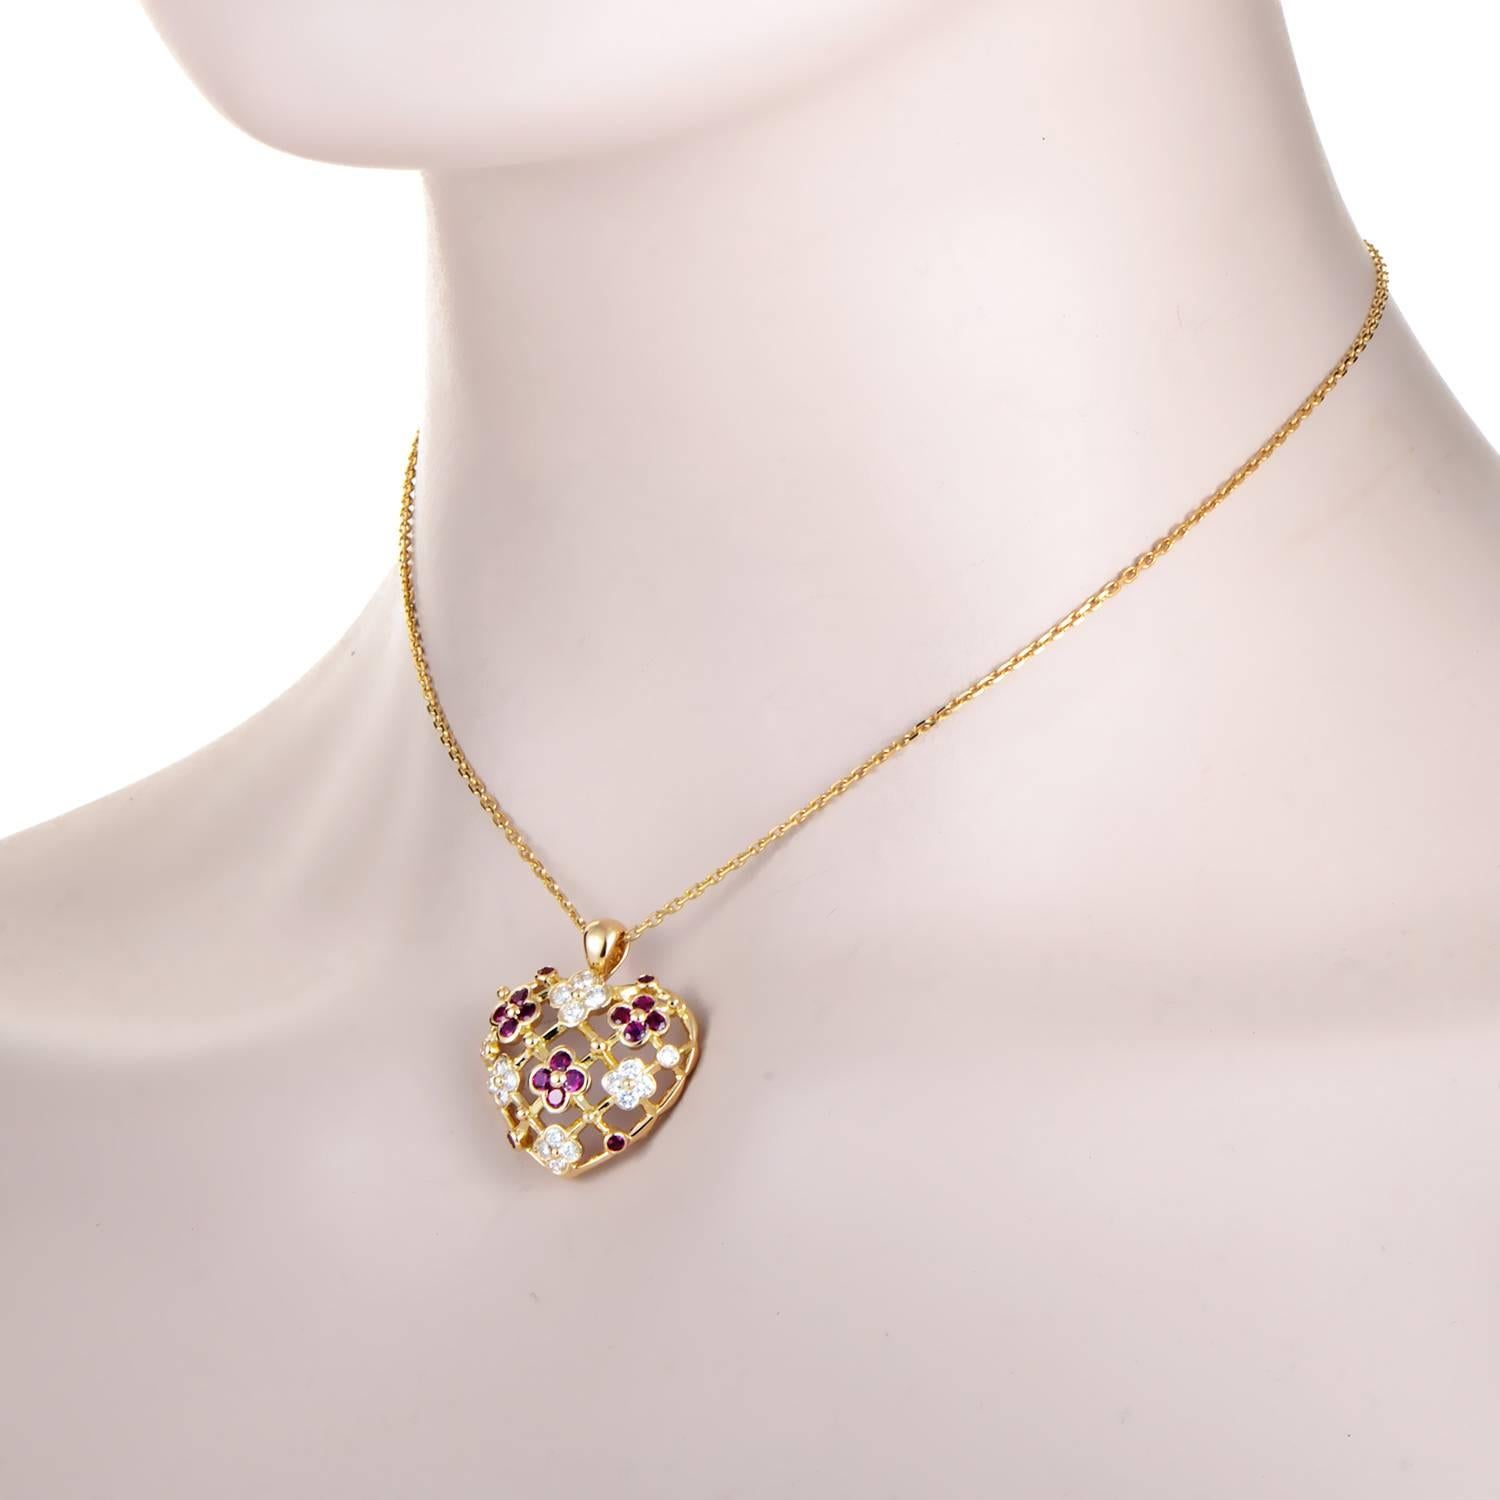 Combining the ever-enchanting form of a heart with delicate floral ornaments in gem stones, this charming necklace from Van Cleef & Arpels is made of 18K yellow gold and adorned with lovely rubies totaling 0.75ct and glistening diamonds weighing in